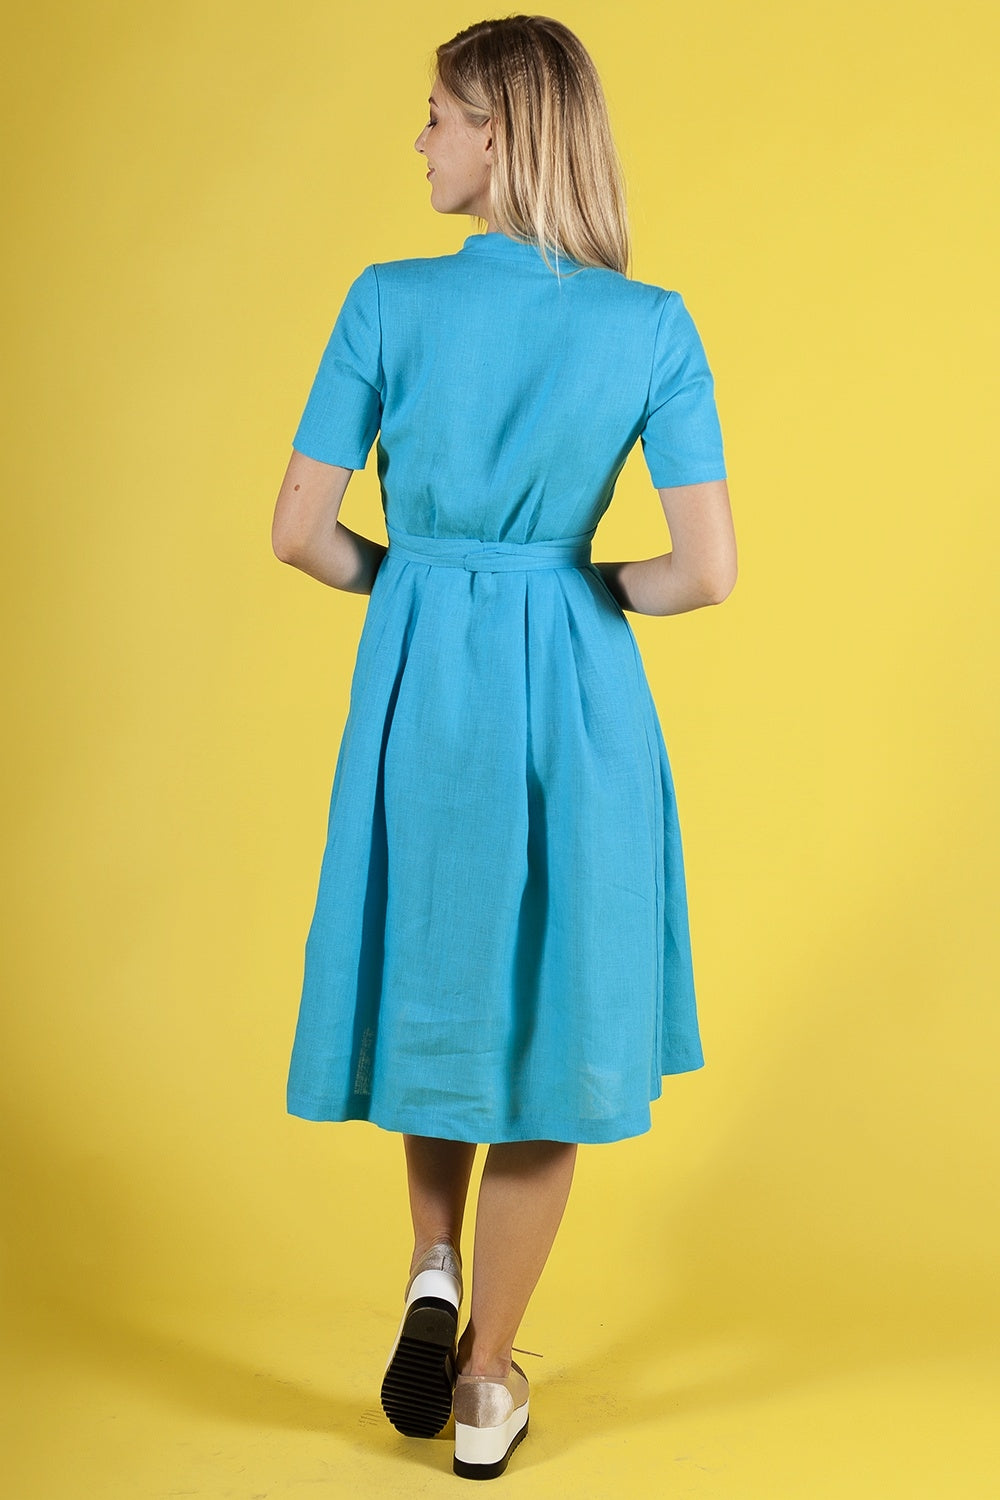 Turquoise linen dress with stand up collar